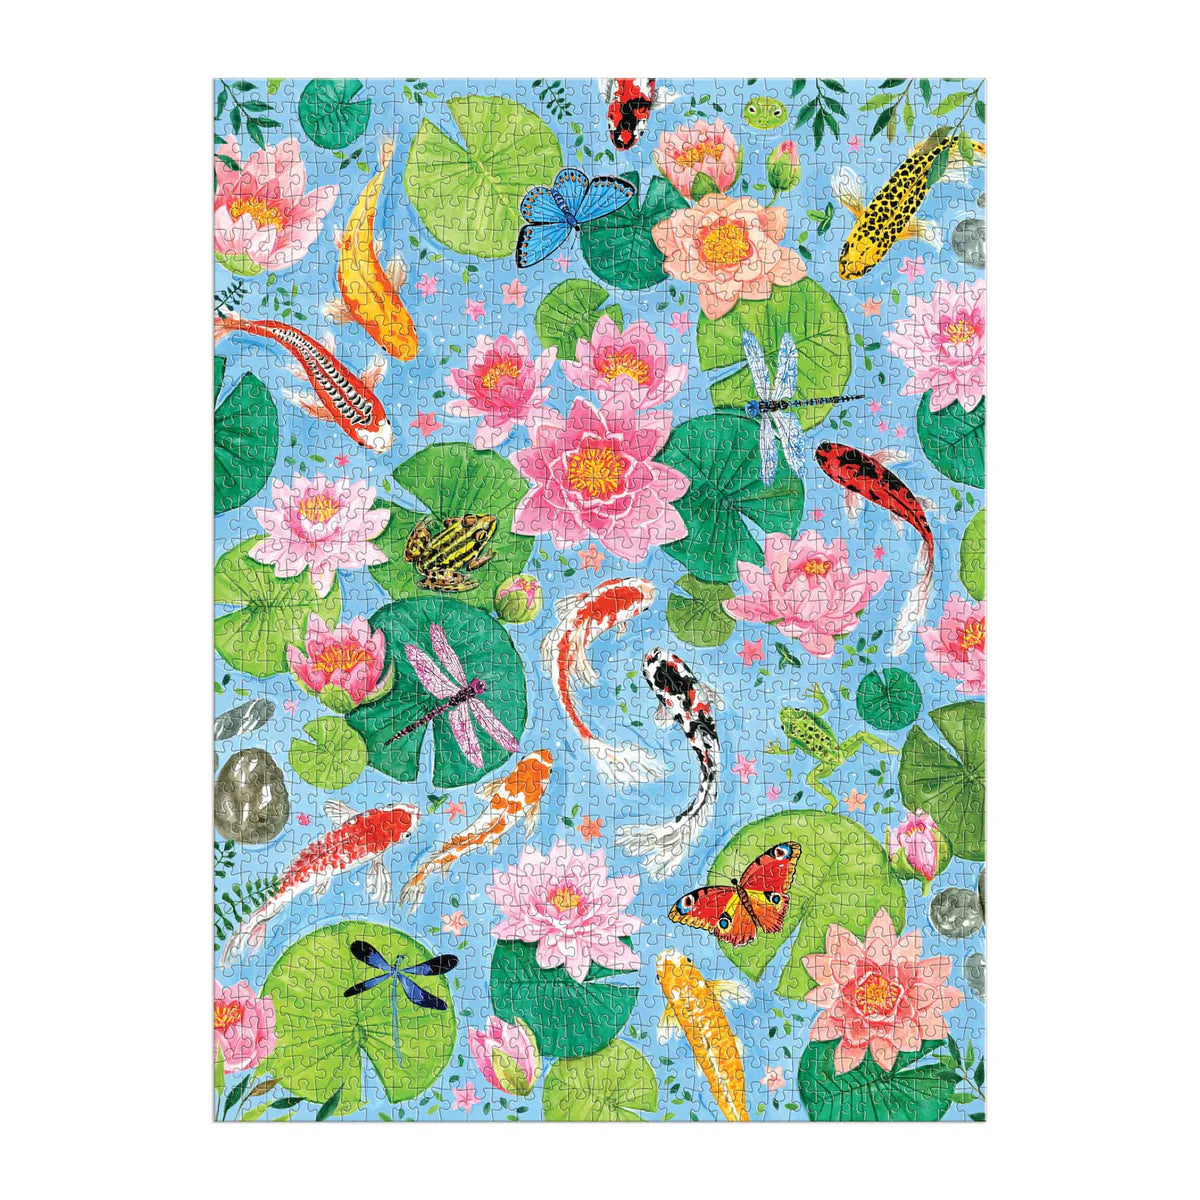 By The Koi Pond Puzzle